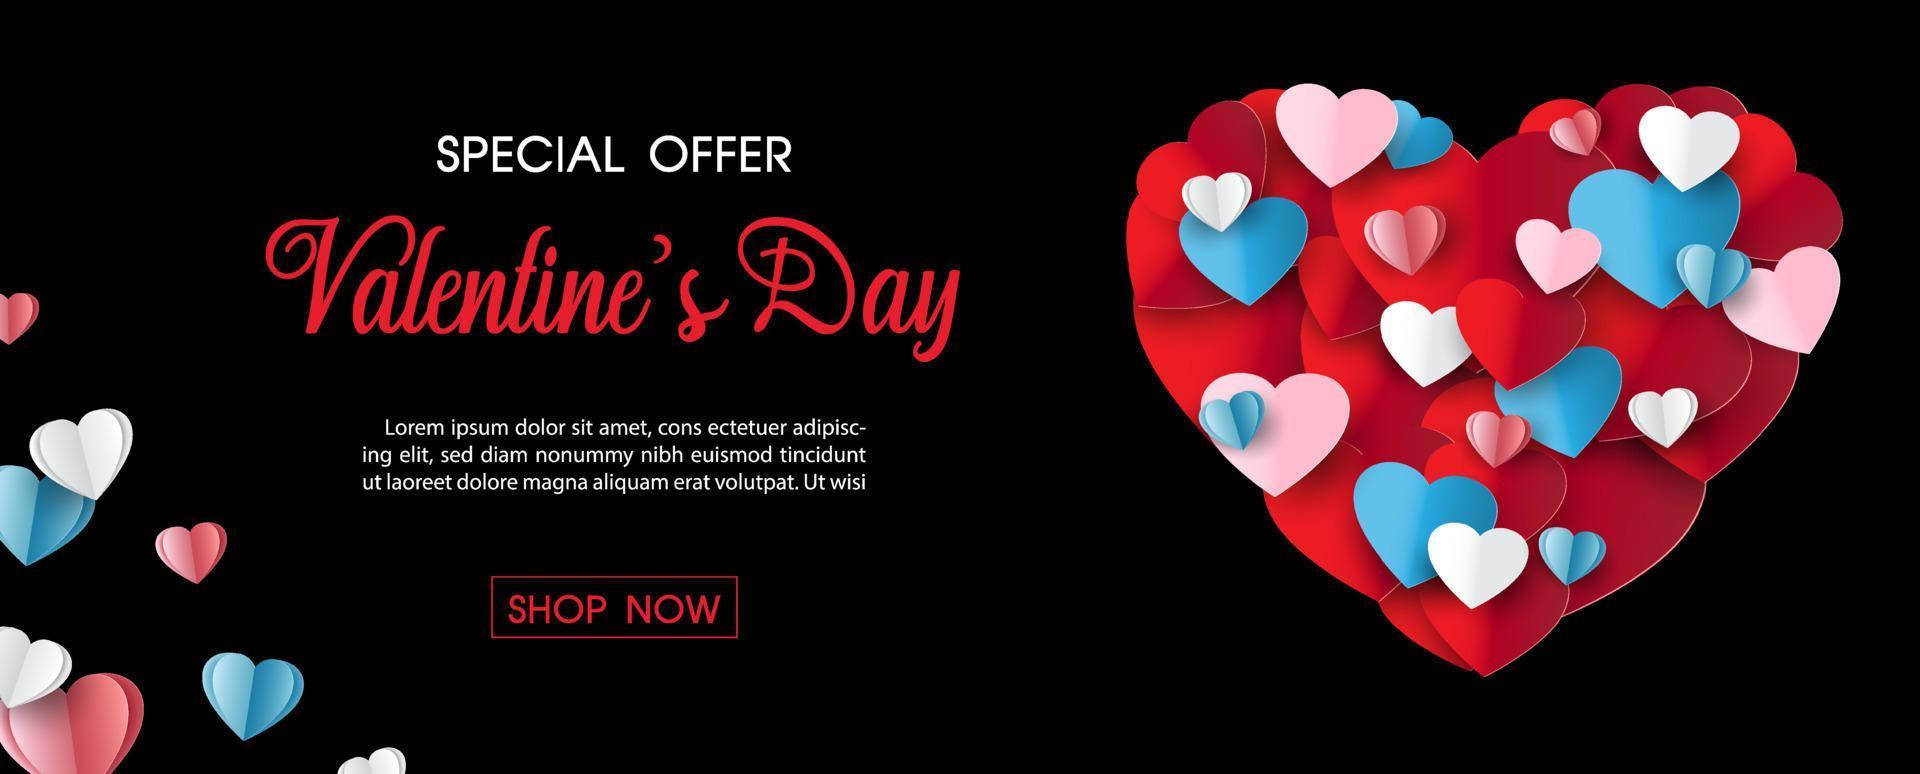 Valentine day's specials offer banner with colorful harts in paper cut style on back background. Valentine greeting card in paper cut style and vector design.